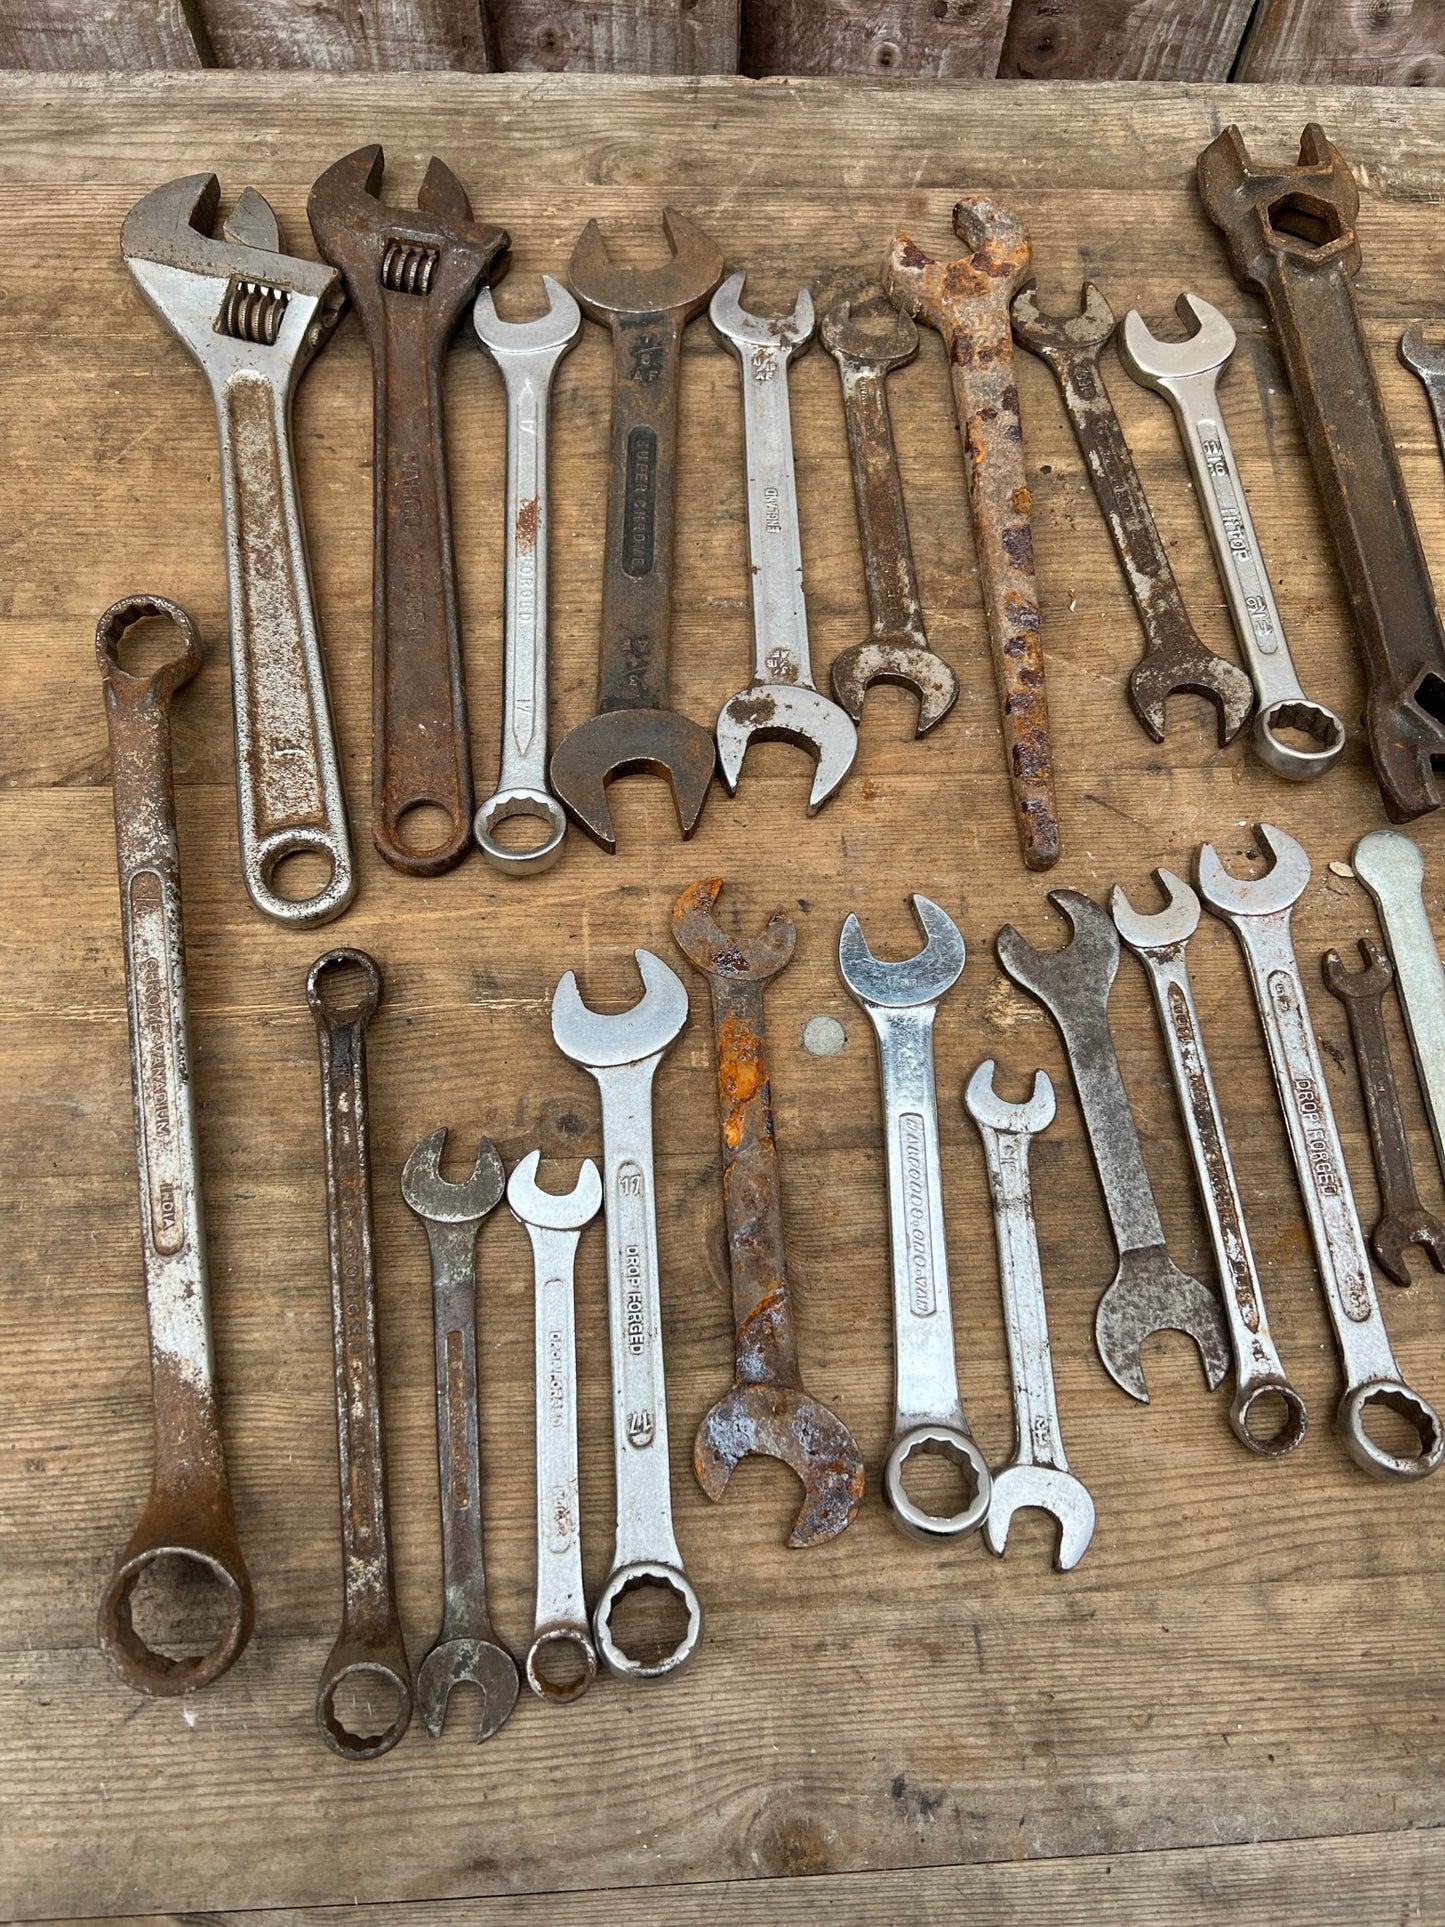 Job Lot of Old Tools Vintage Spanners & Sockets